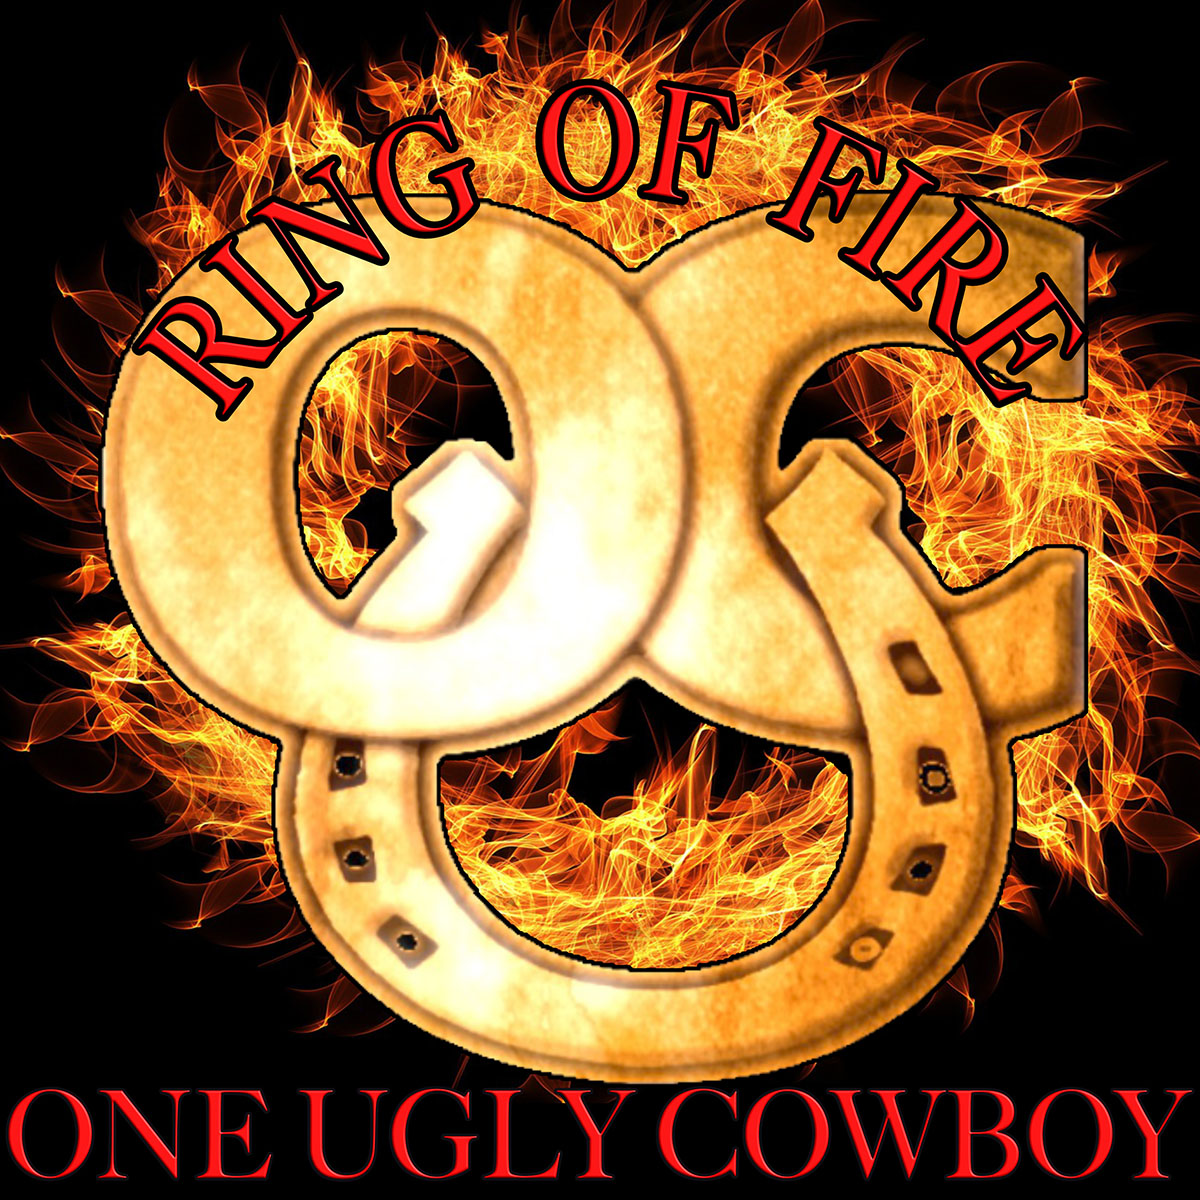 One Ugly Cowboy - Album Ring of Fire